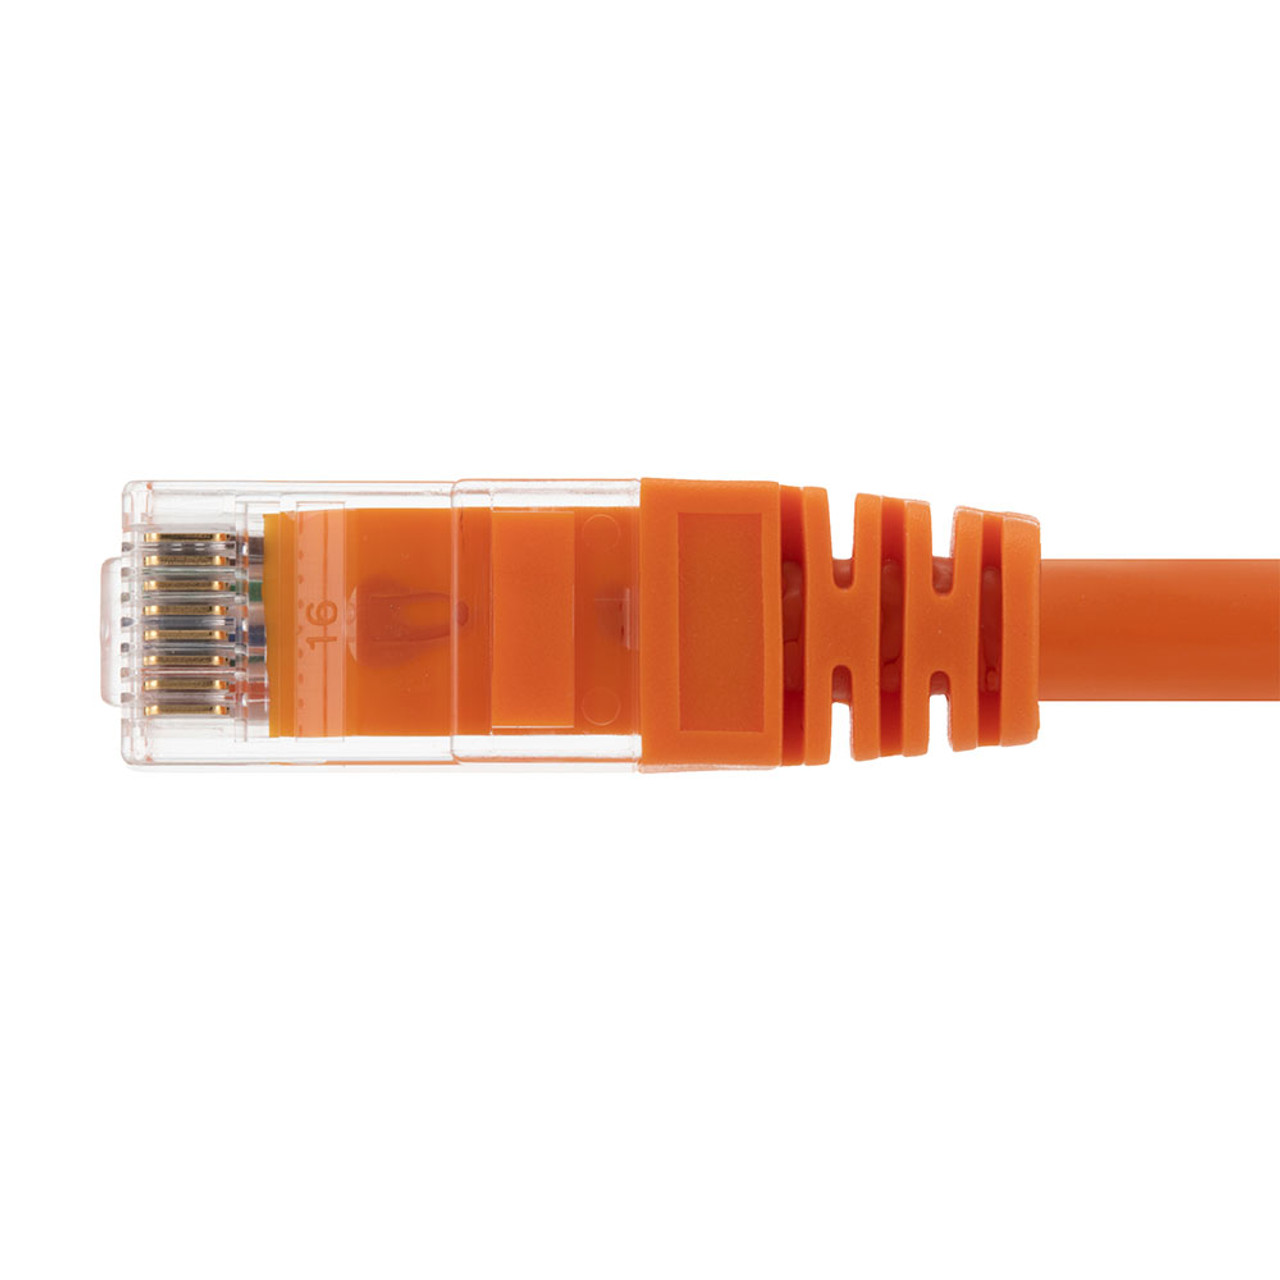 Ethernet Patch Cable CAT6, UTP, 24AWG, 7 Ft,  10 pack, Orange